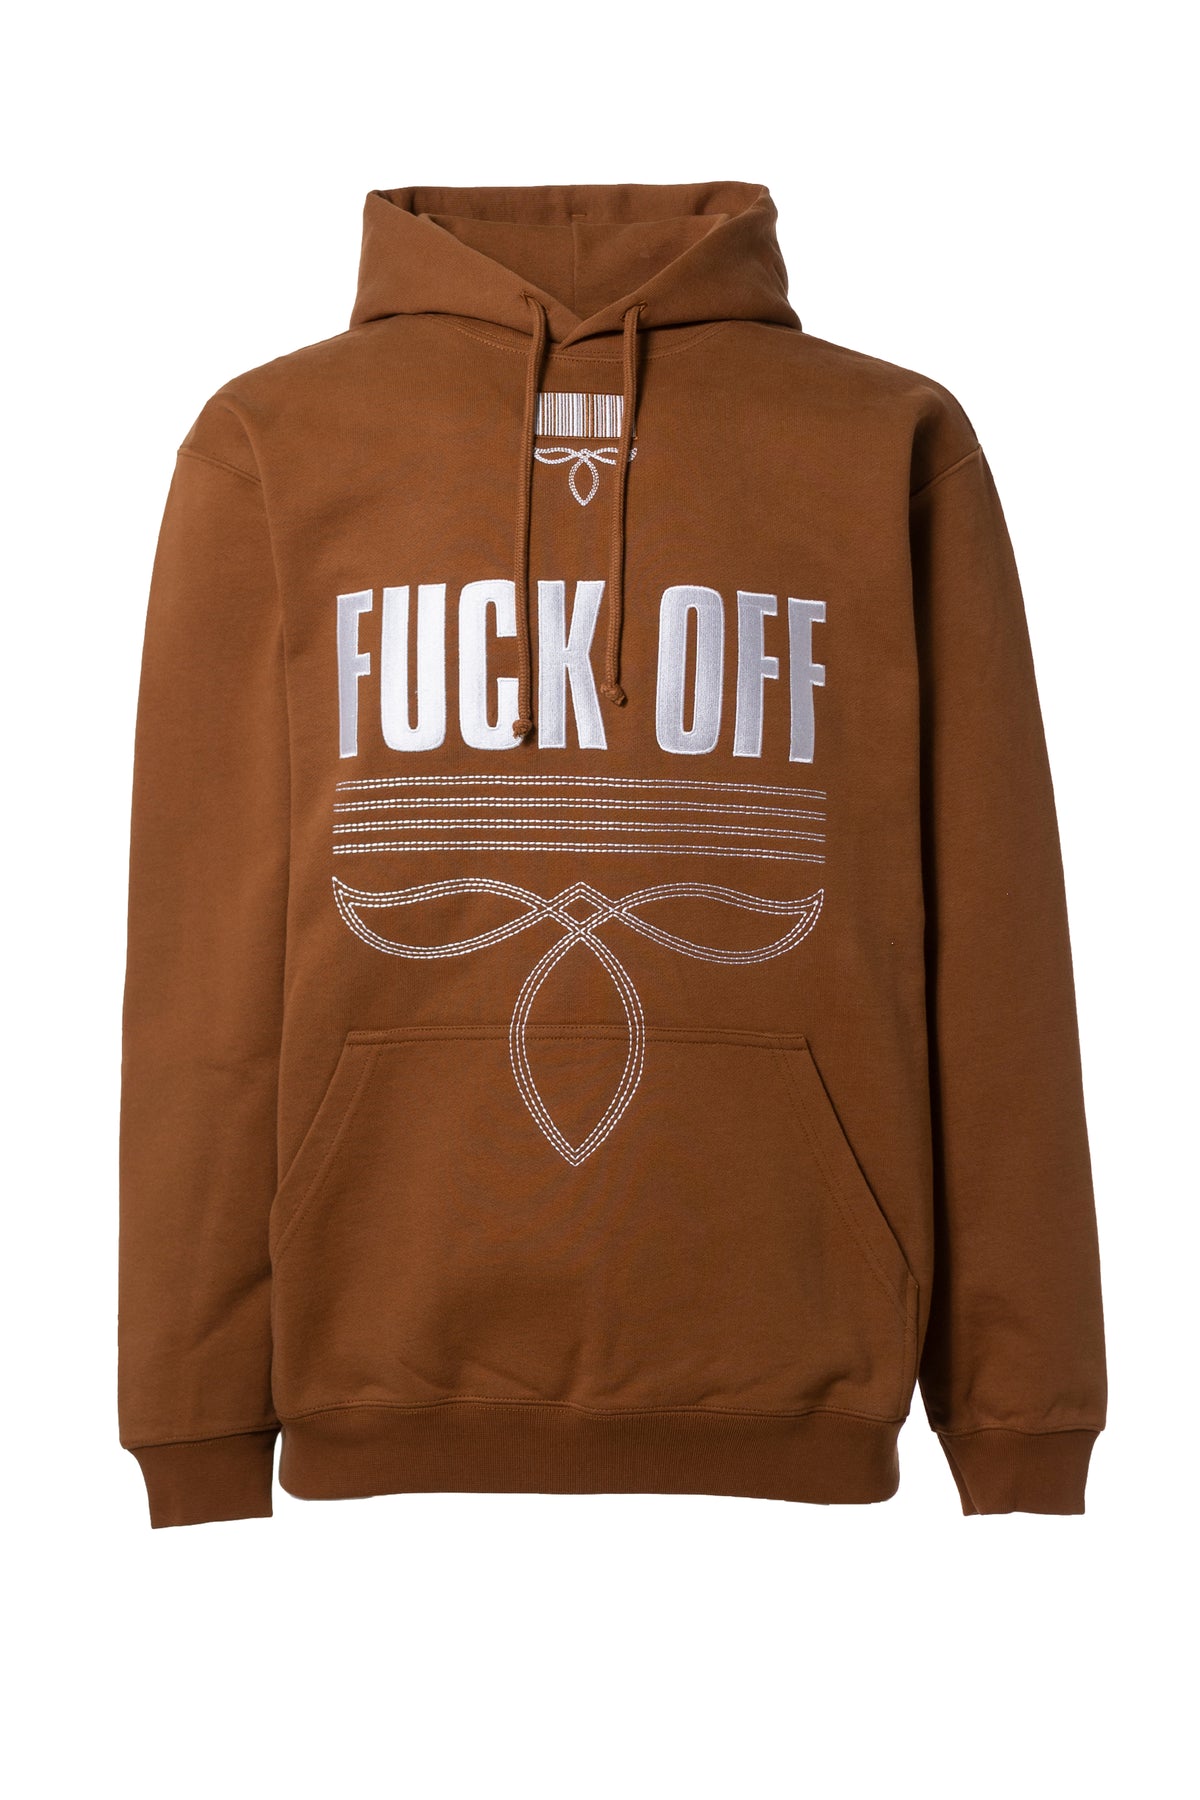 FUCK OFF FULLY EMBROIDERED HOODIE / BRW